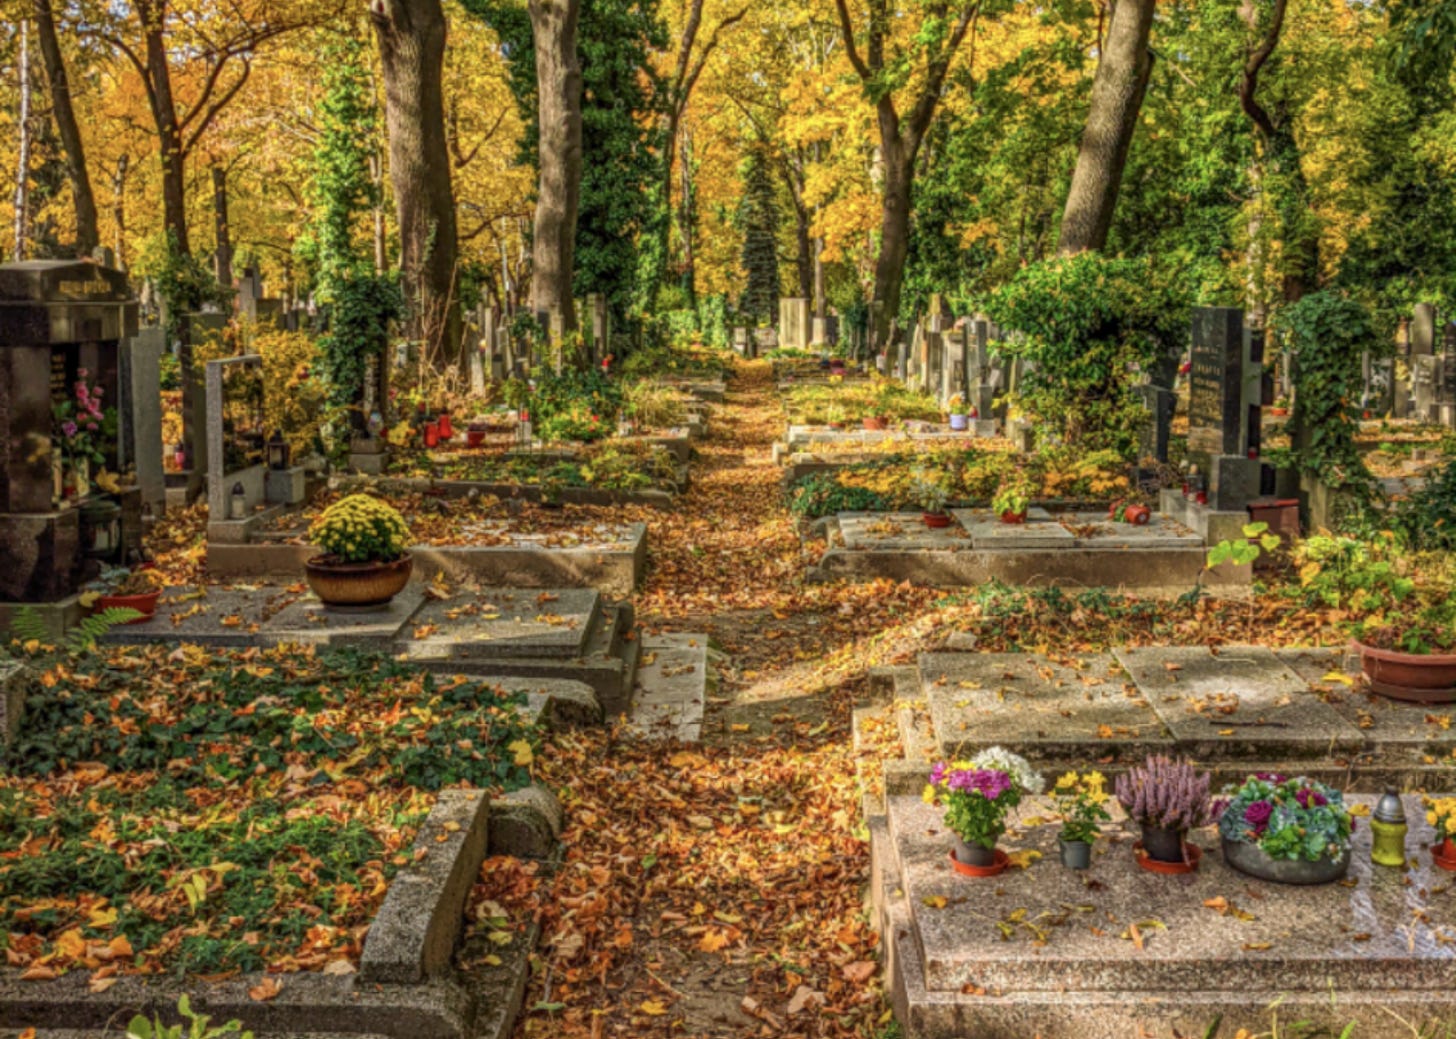 Two rows of graves face each other under a canopy of trees in Prague's Olsany Cemetery